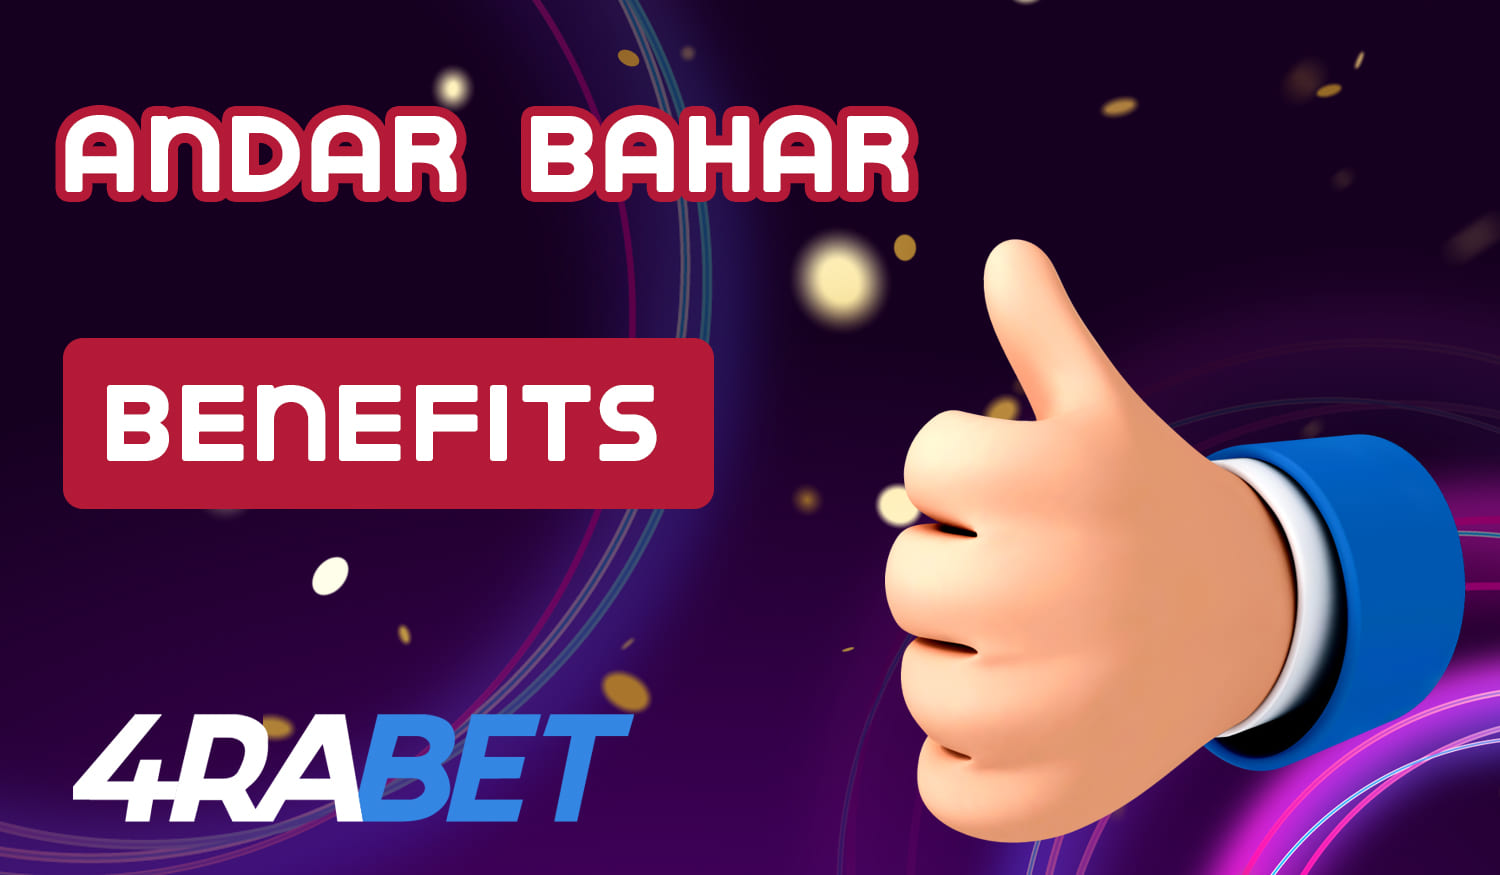 Main advantages of 4raBet for Indian users